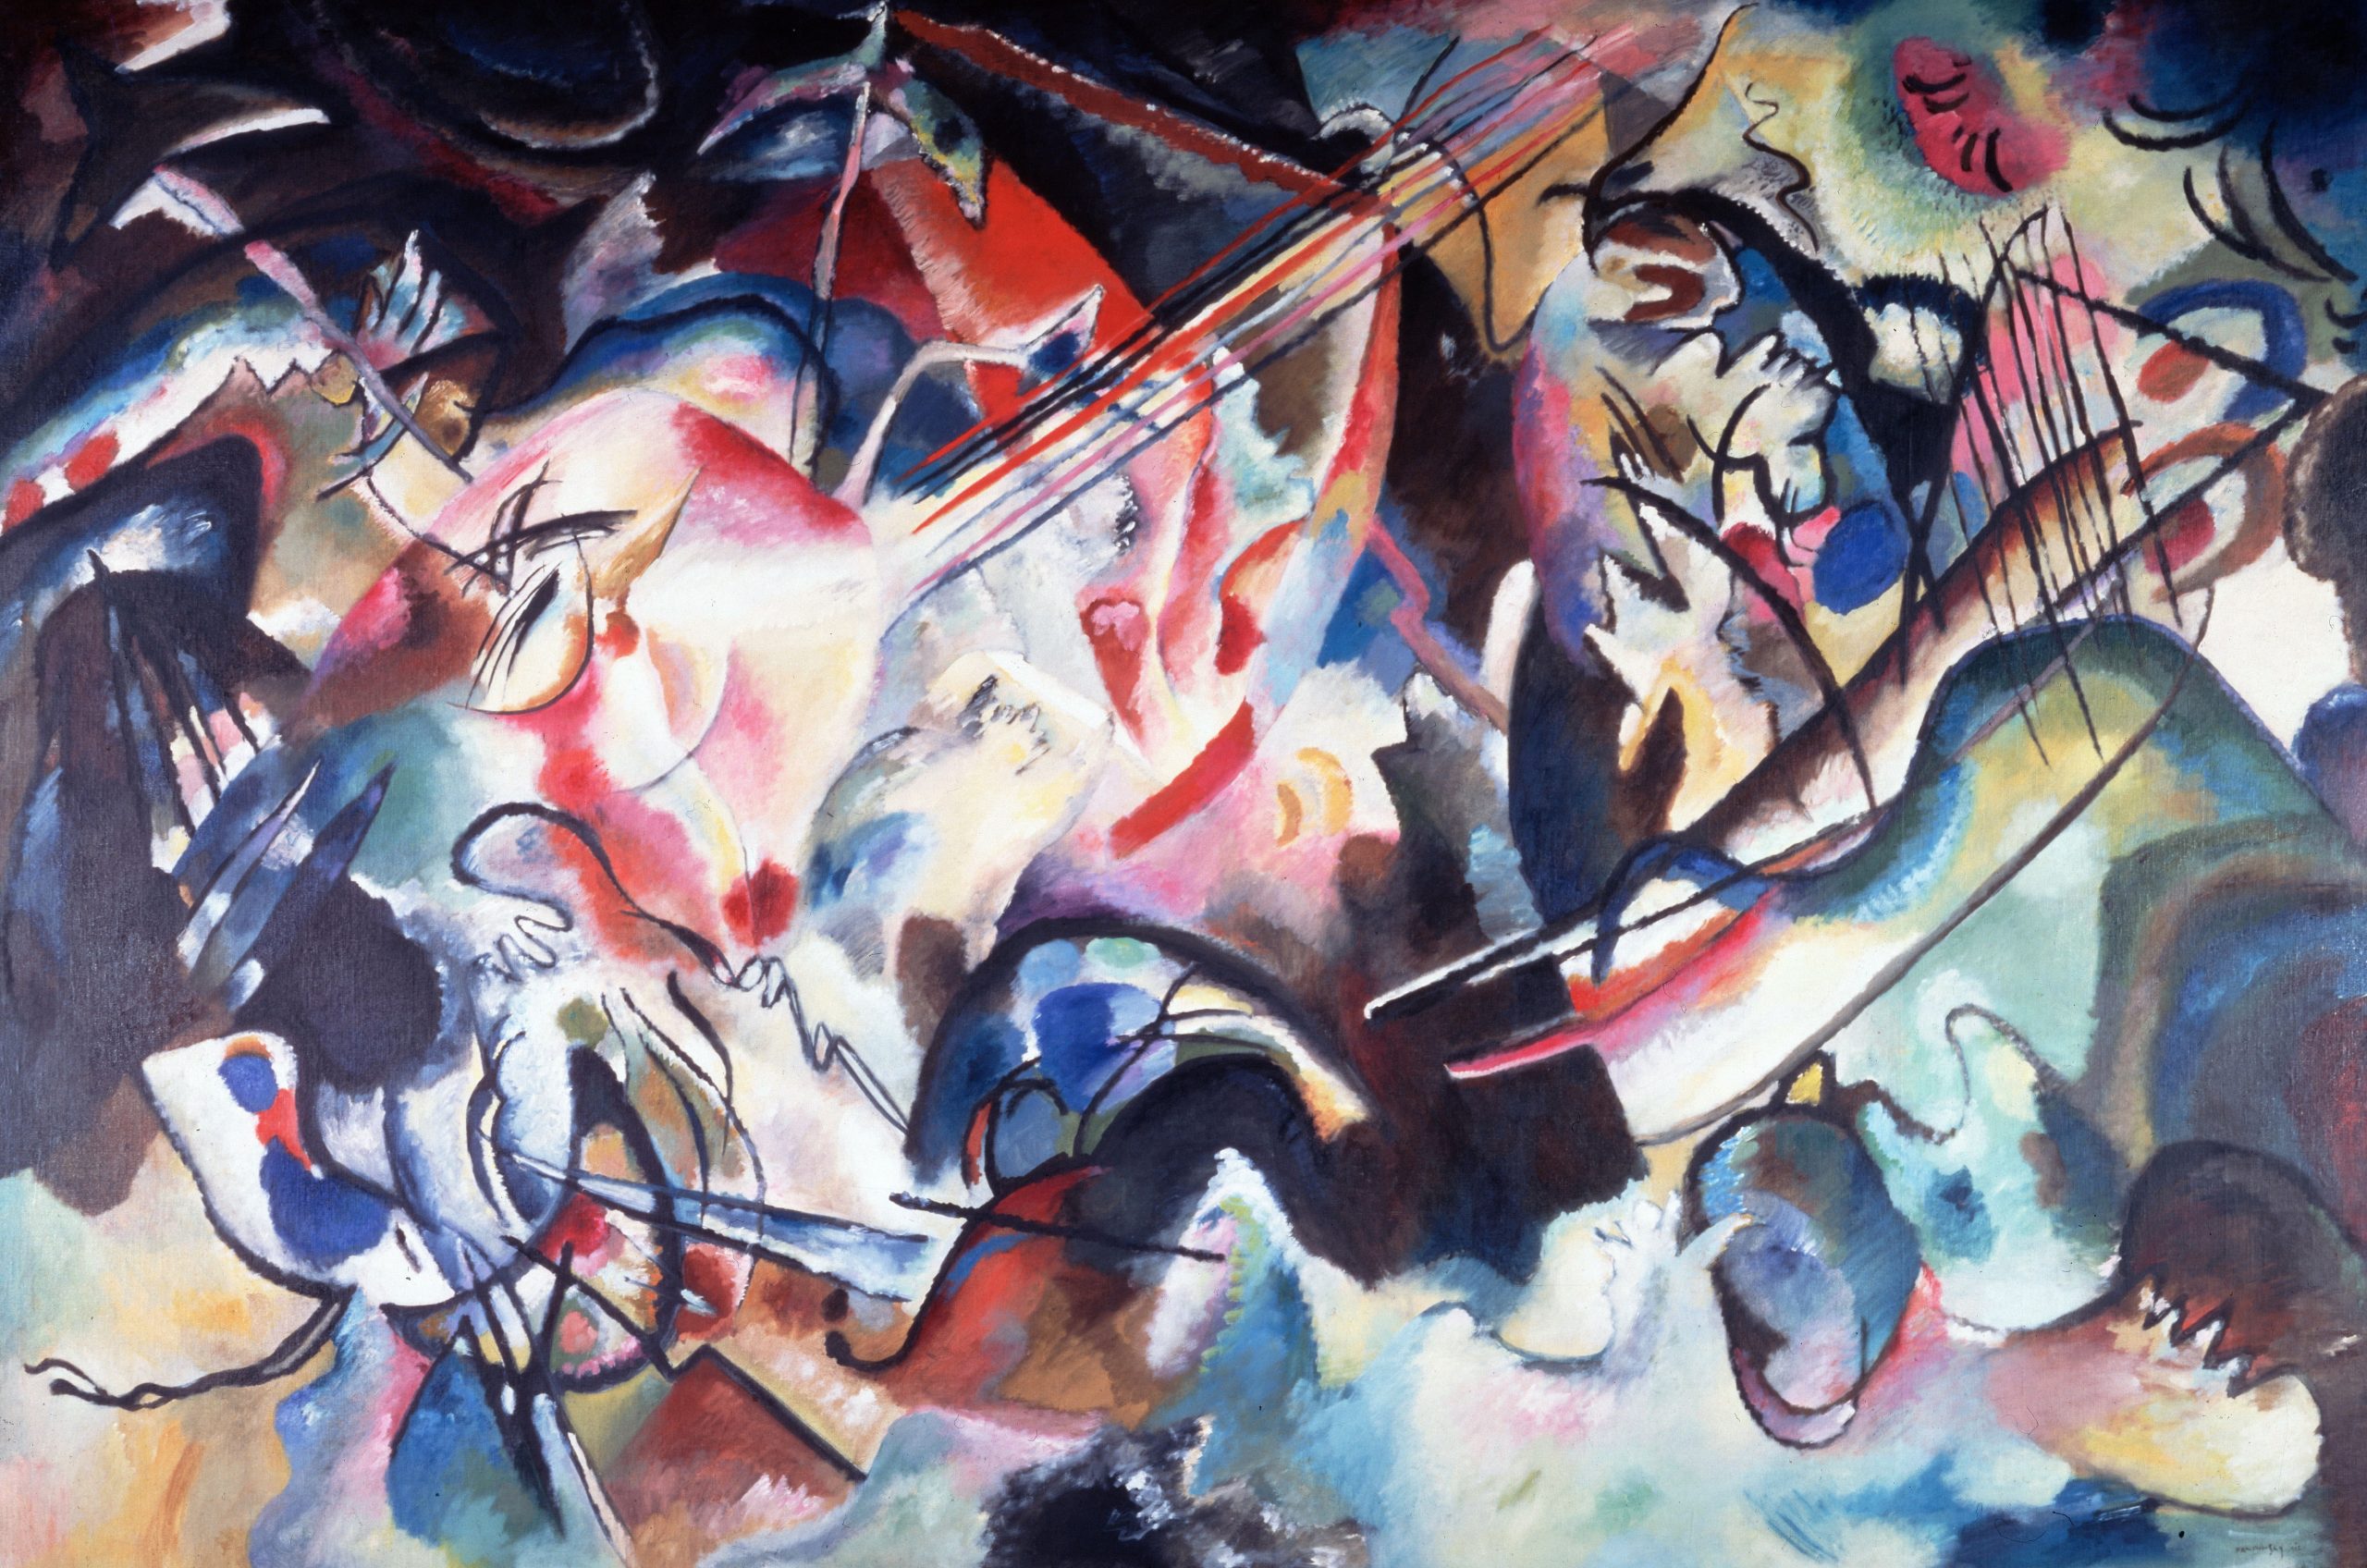 Multicolored Abstract Painting Wallpaper, Picture, Wassily Kandinsky,  Composition VI - Wallpaperforu